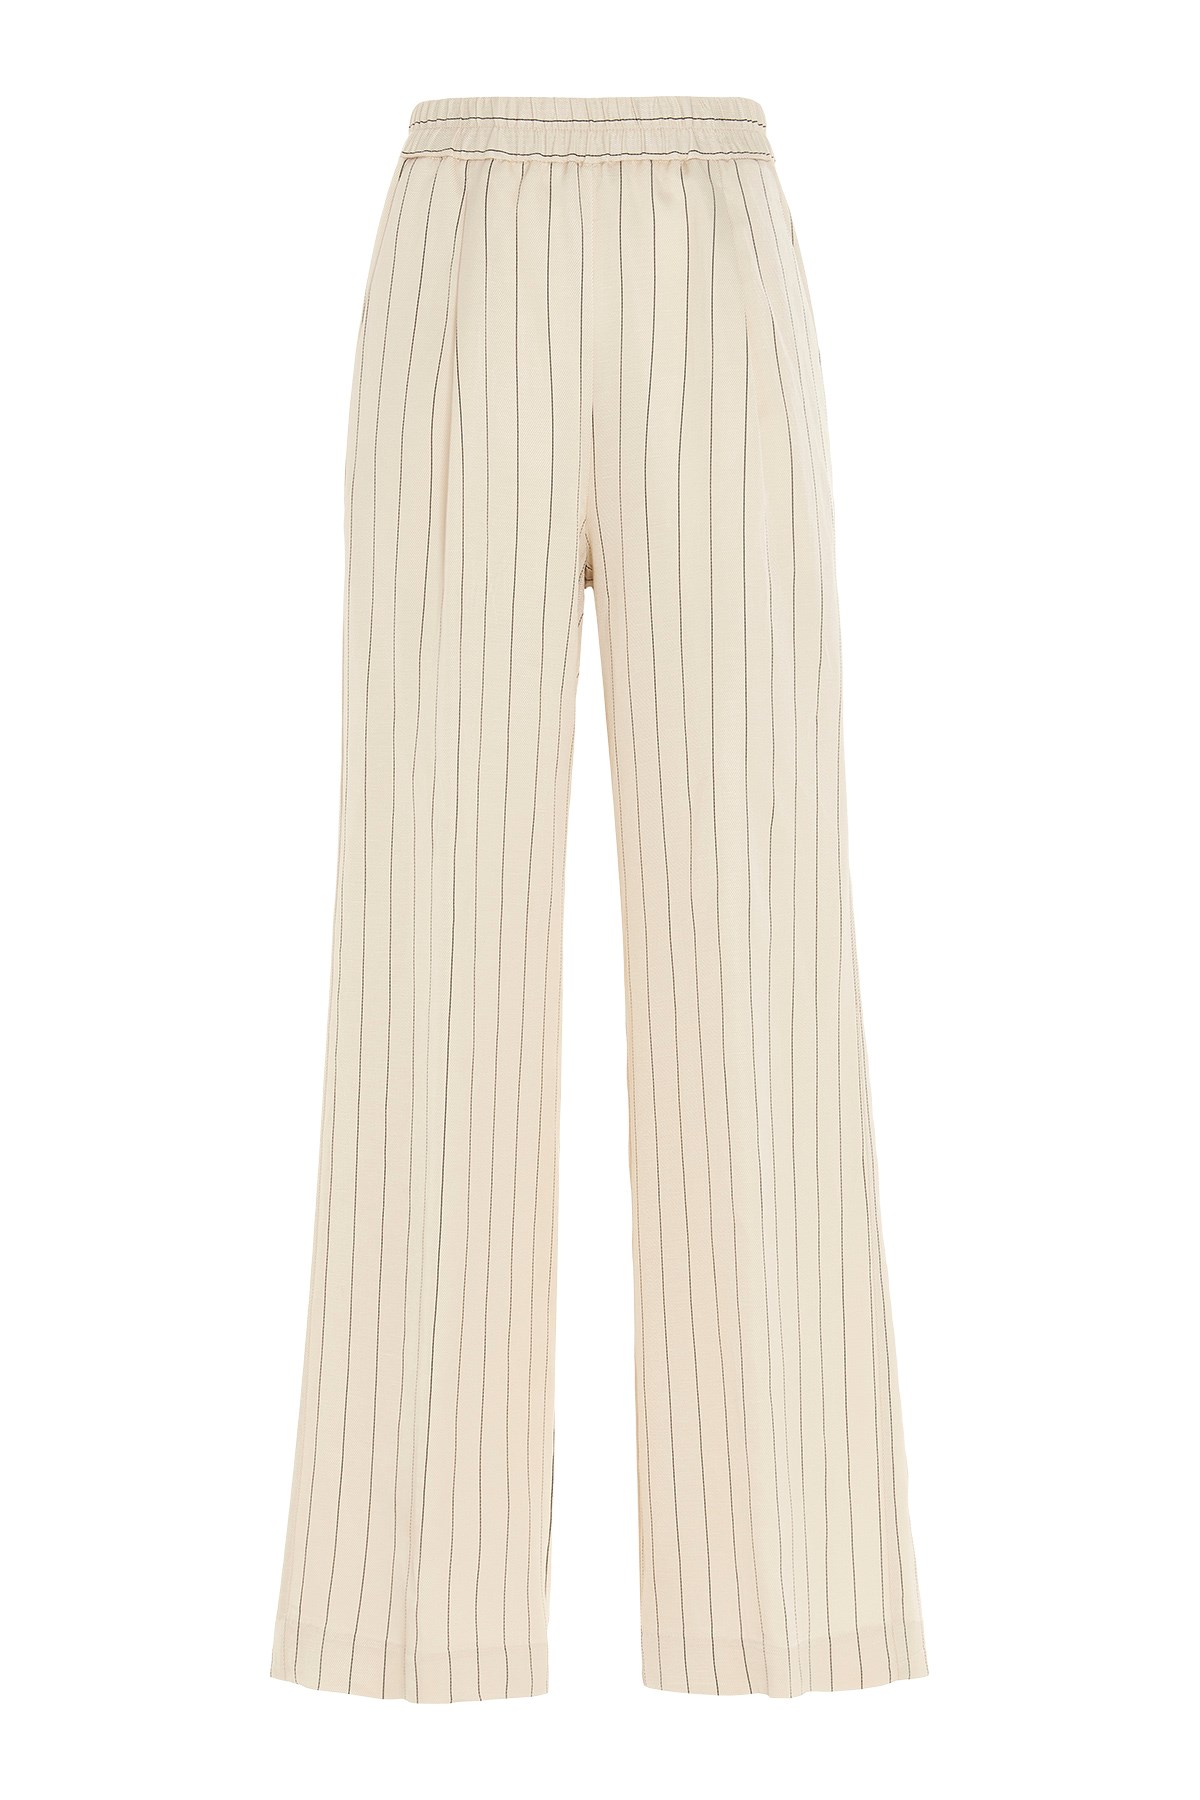 NUDE Pinstriped Trousers